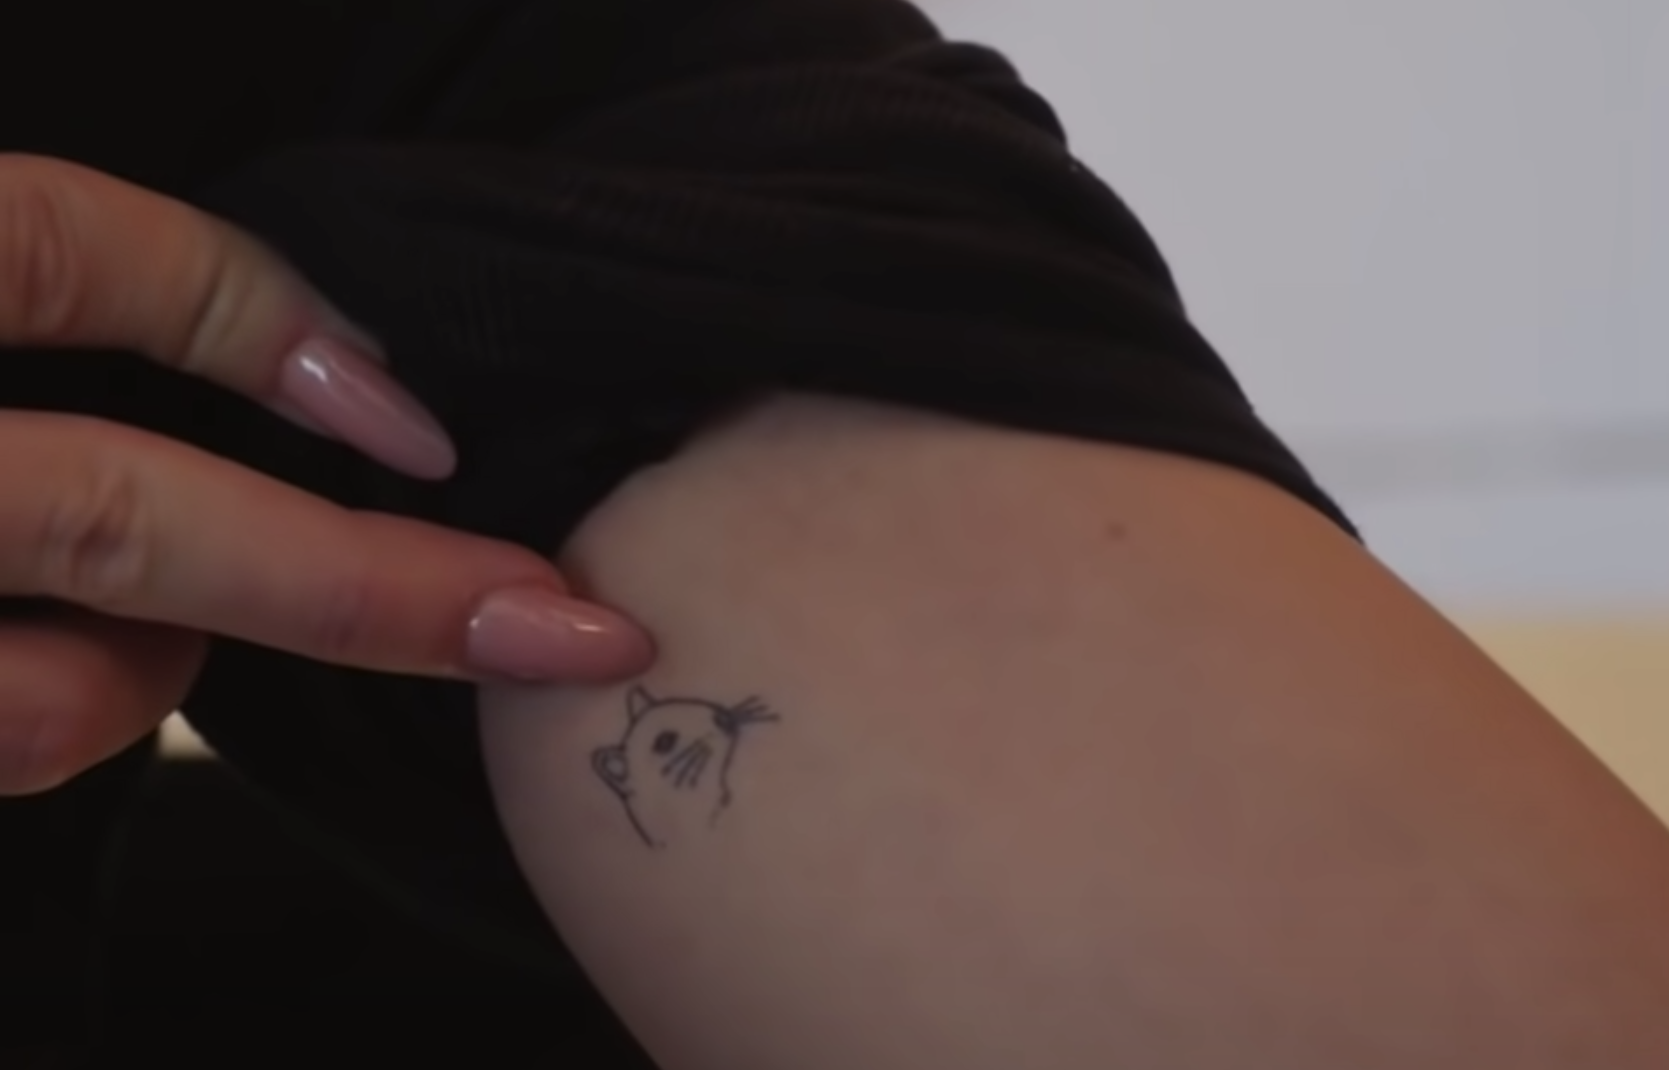 Emma Chamberlain's Tattoos and Their Meanings